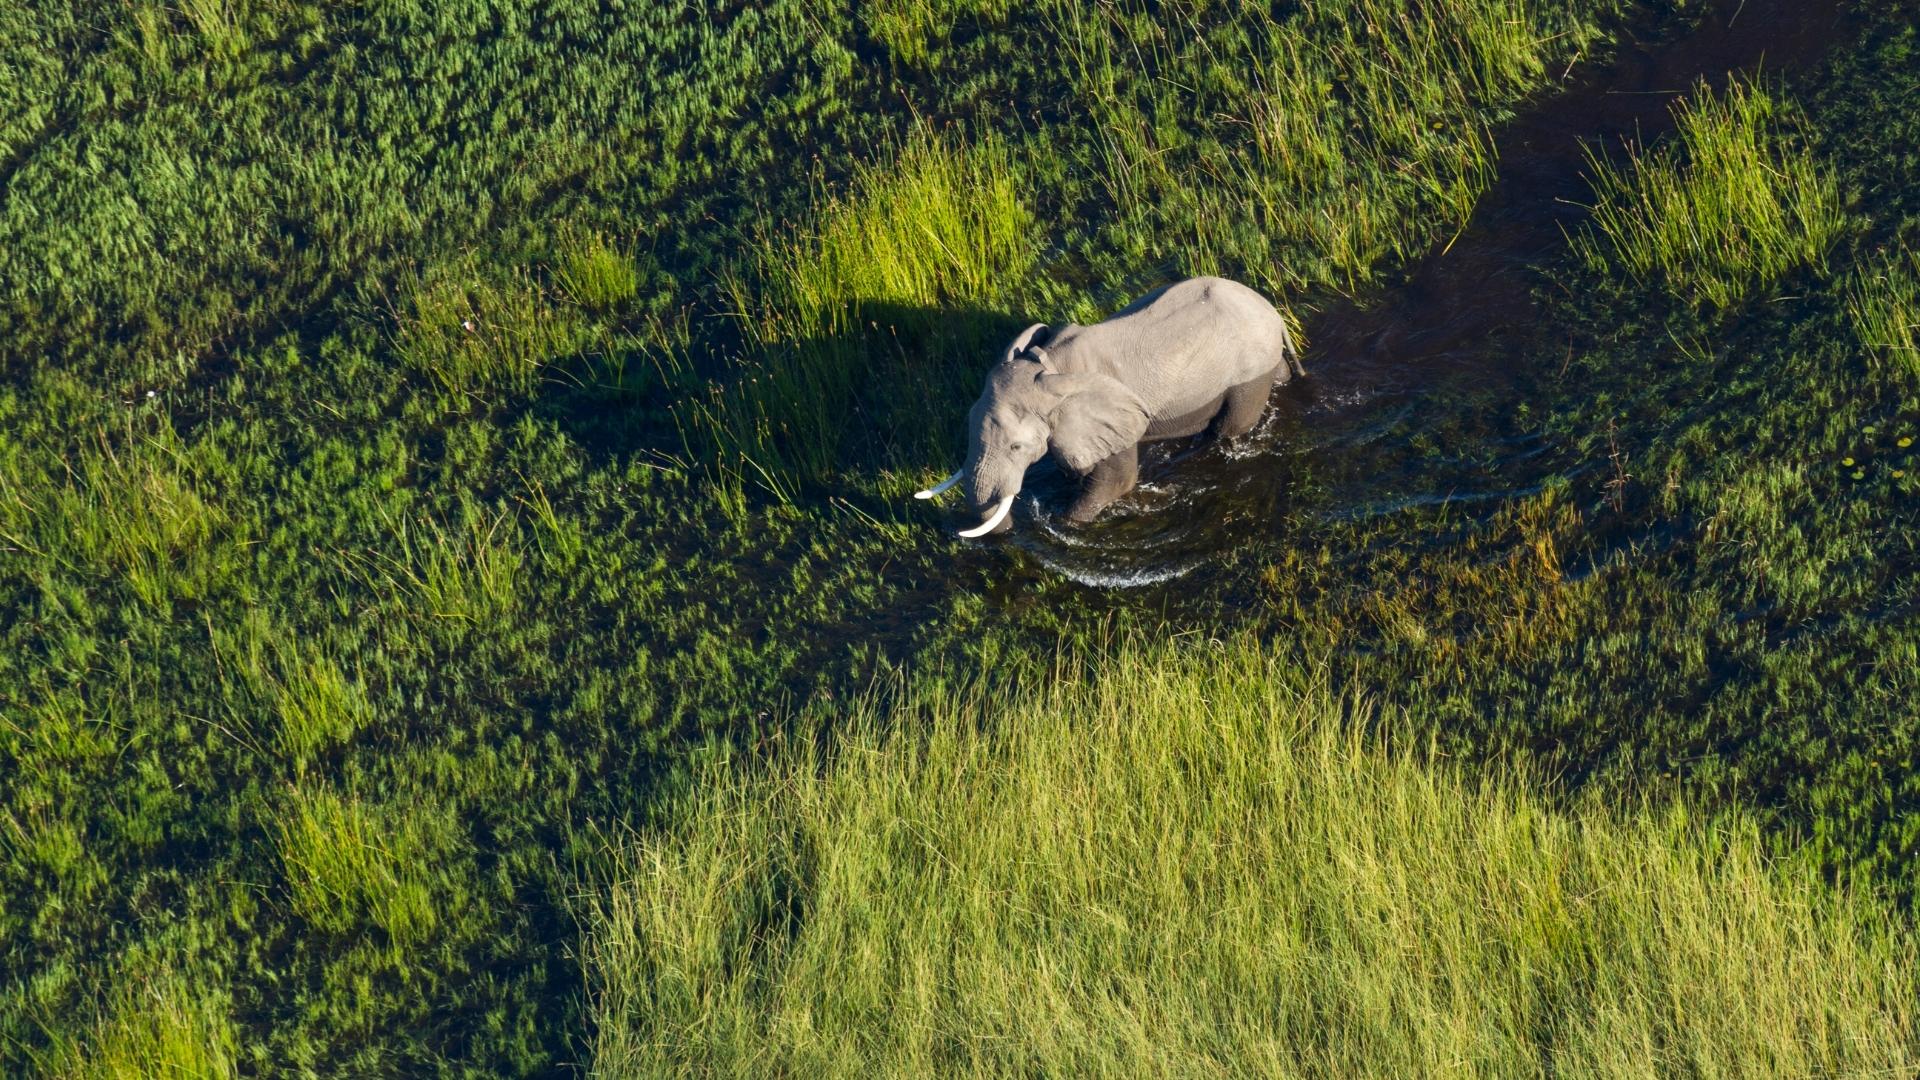 A helicopter view of an elephant - Moremi Game Reserve, Botswana